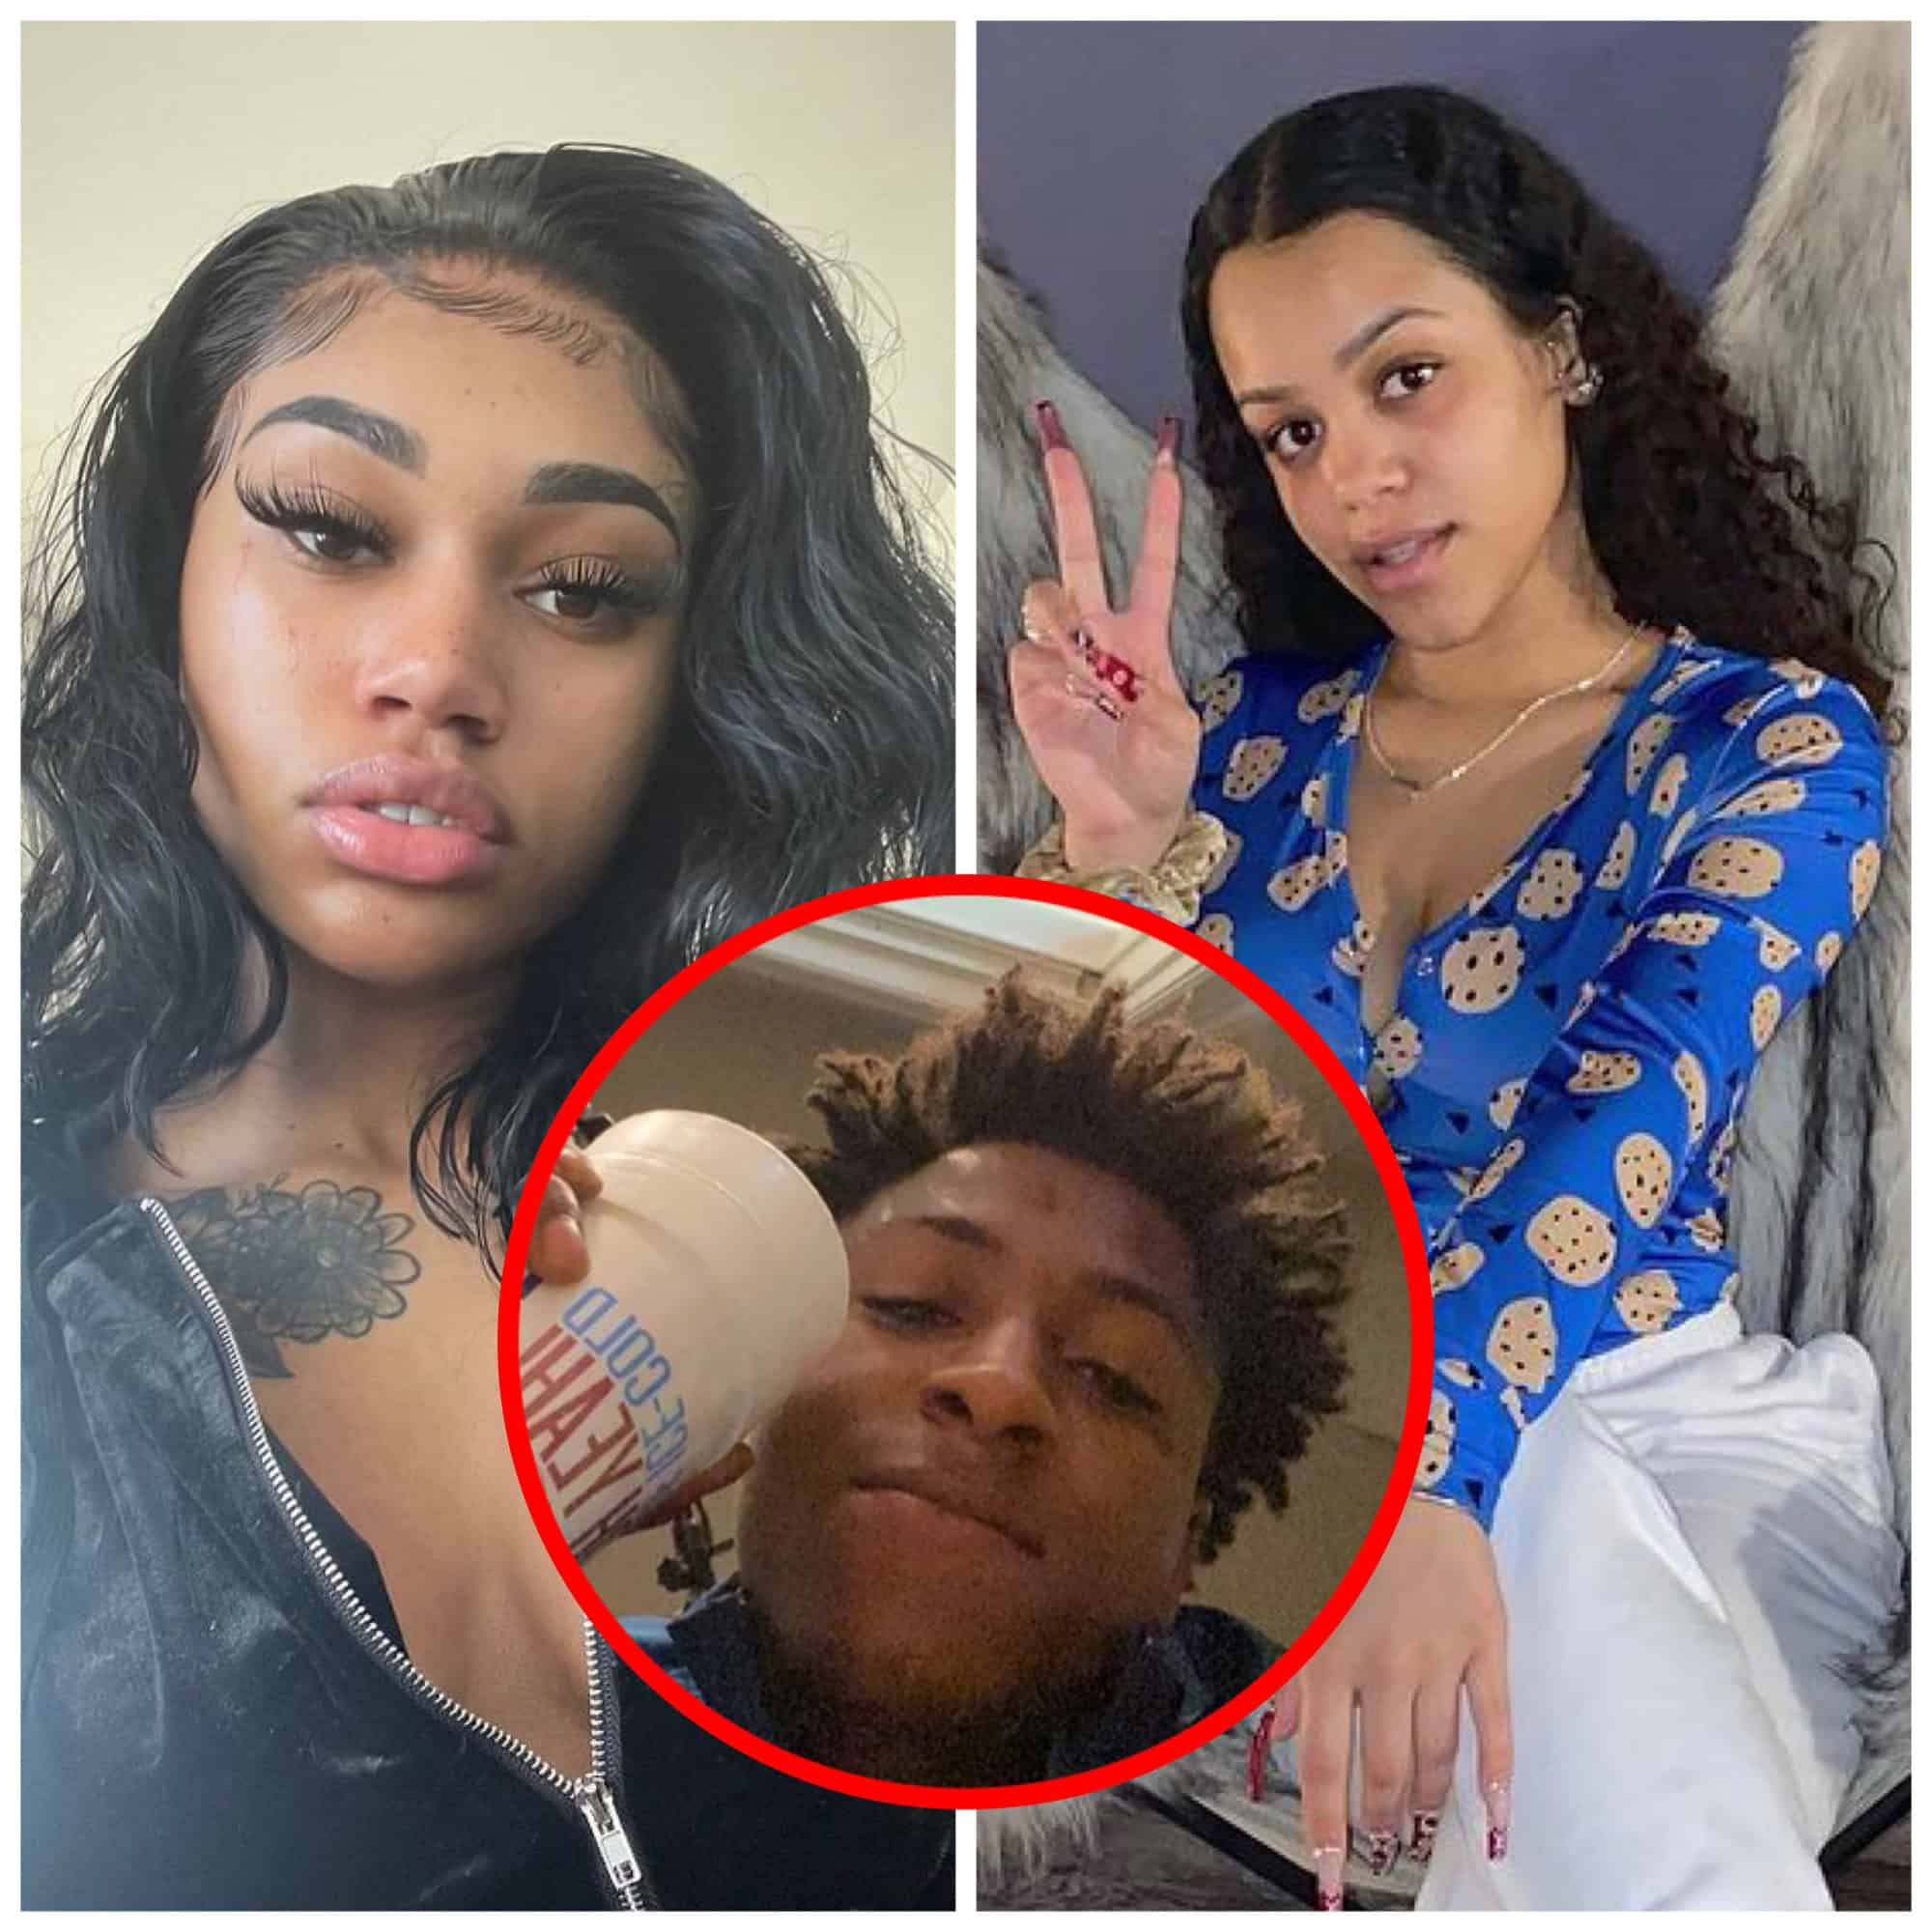 NBA YoungBoy’s Girlfriend And His Son’s Mother Jania Go At It After Jania Shared Meme Referencing Their Situation